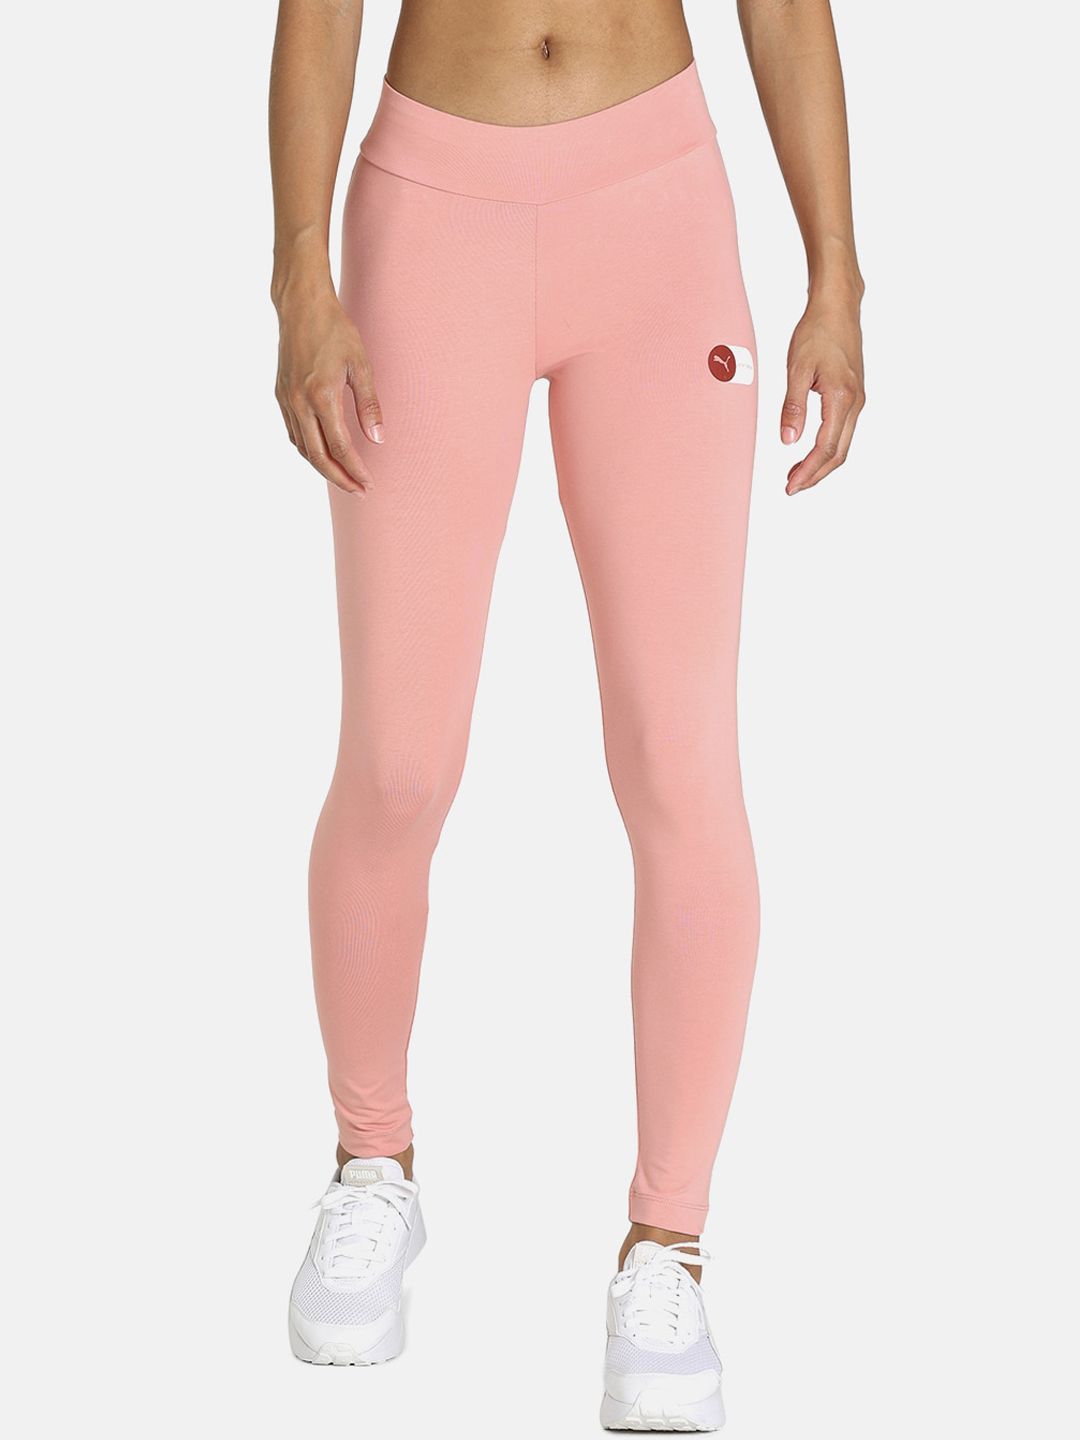 Puma Women Pink Graphic Logo Skinny Fit Tights Price in India